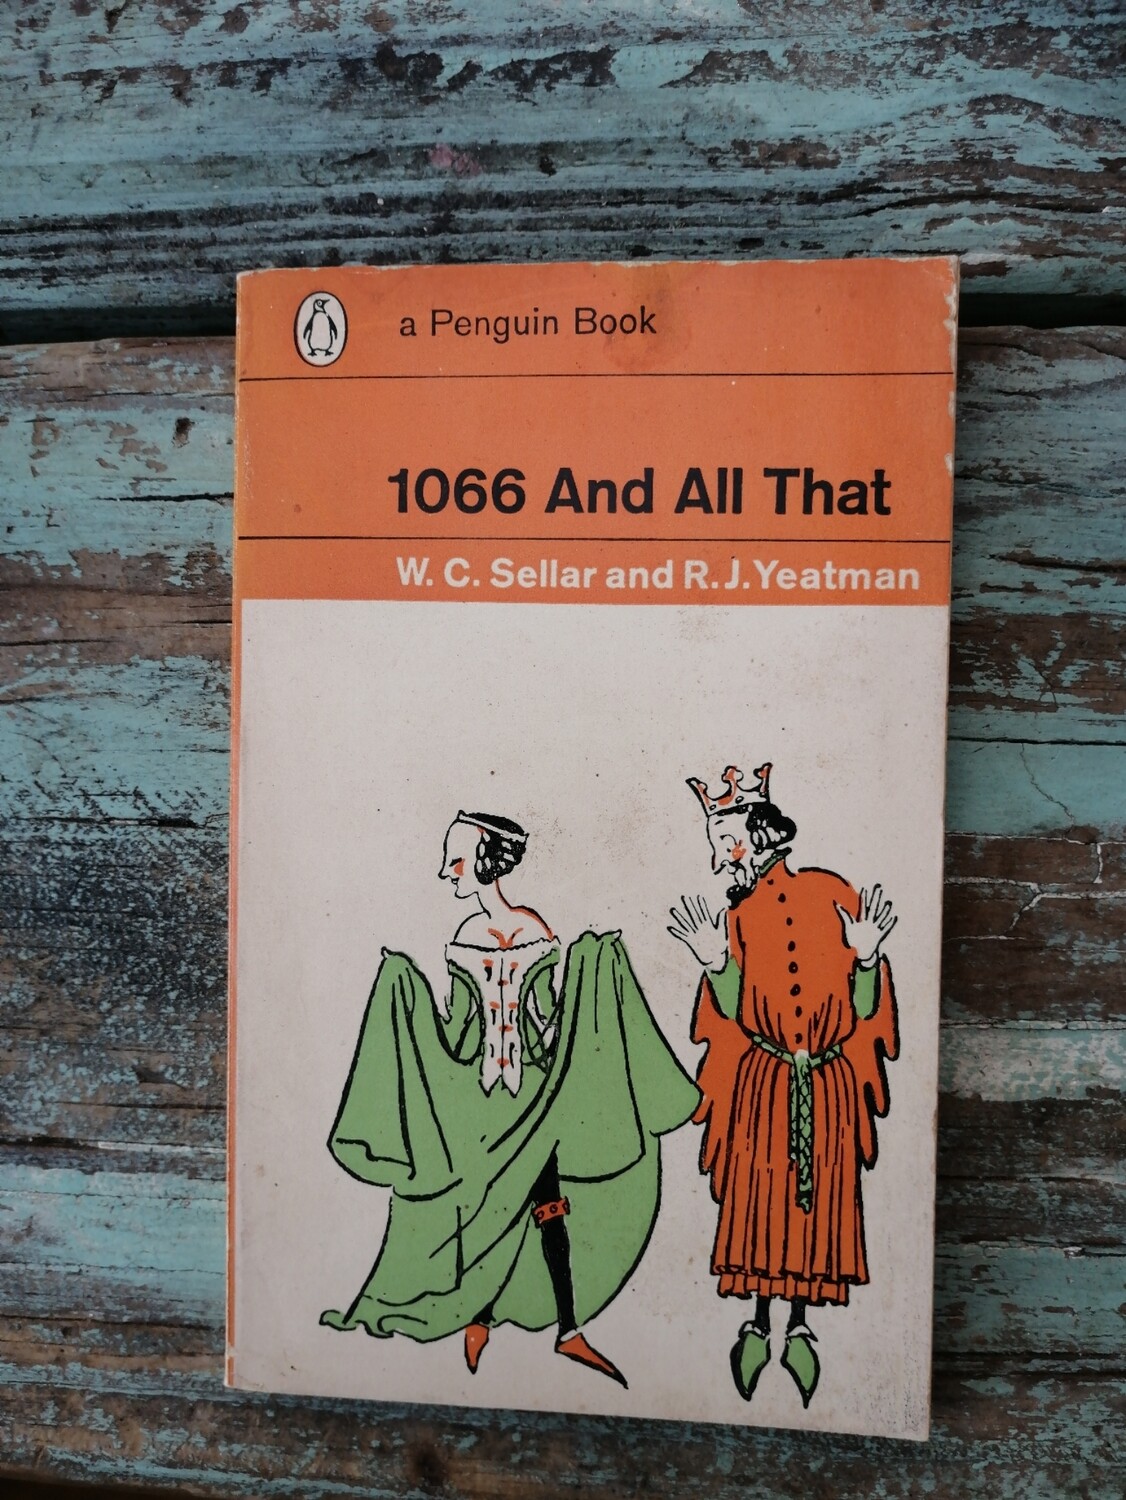 1066 And All That, W.C. Seller and R.J. Yestman